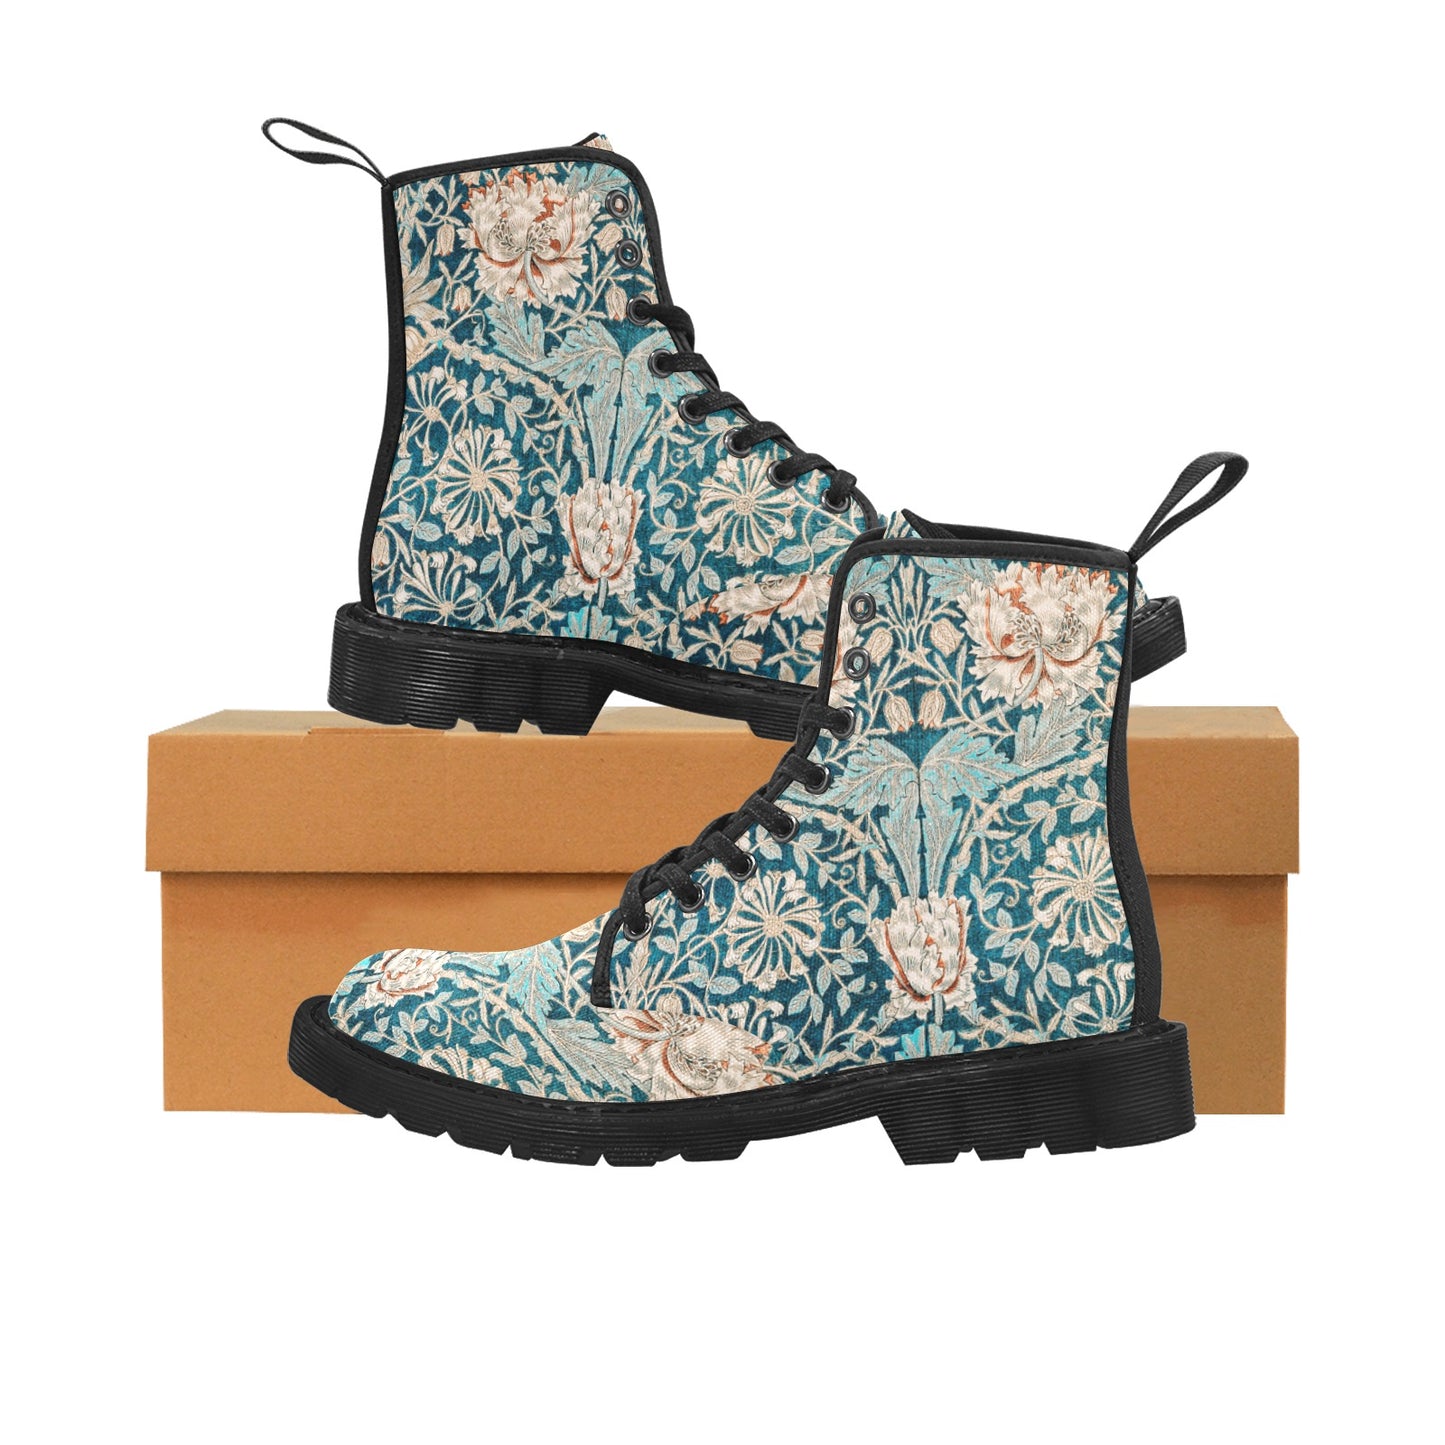 Men’s Flowered Canvas Boots with Hyacinth William Morris Wallpaper Design